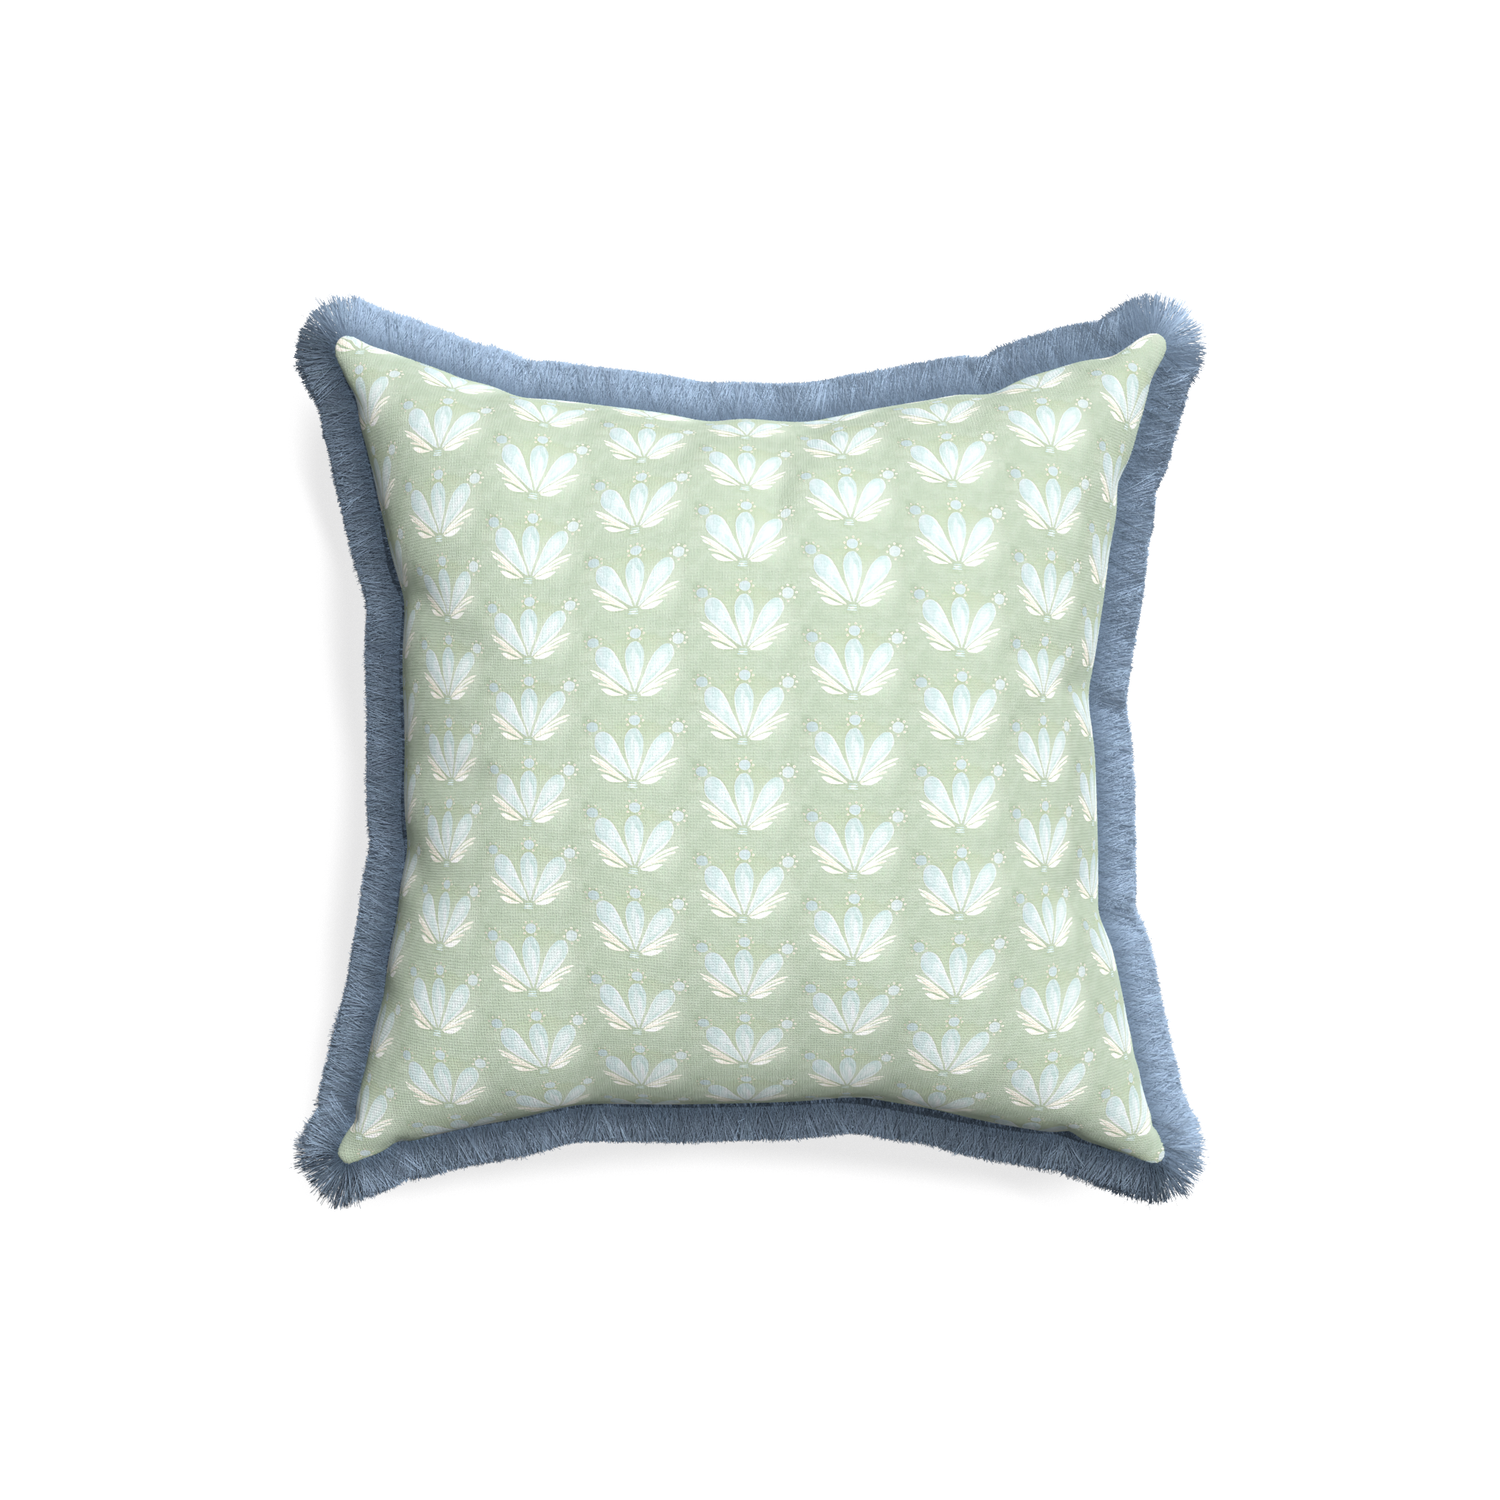 18-square serena sea salt custom blue & green floral drop repeatpillow with sky fringe on white background